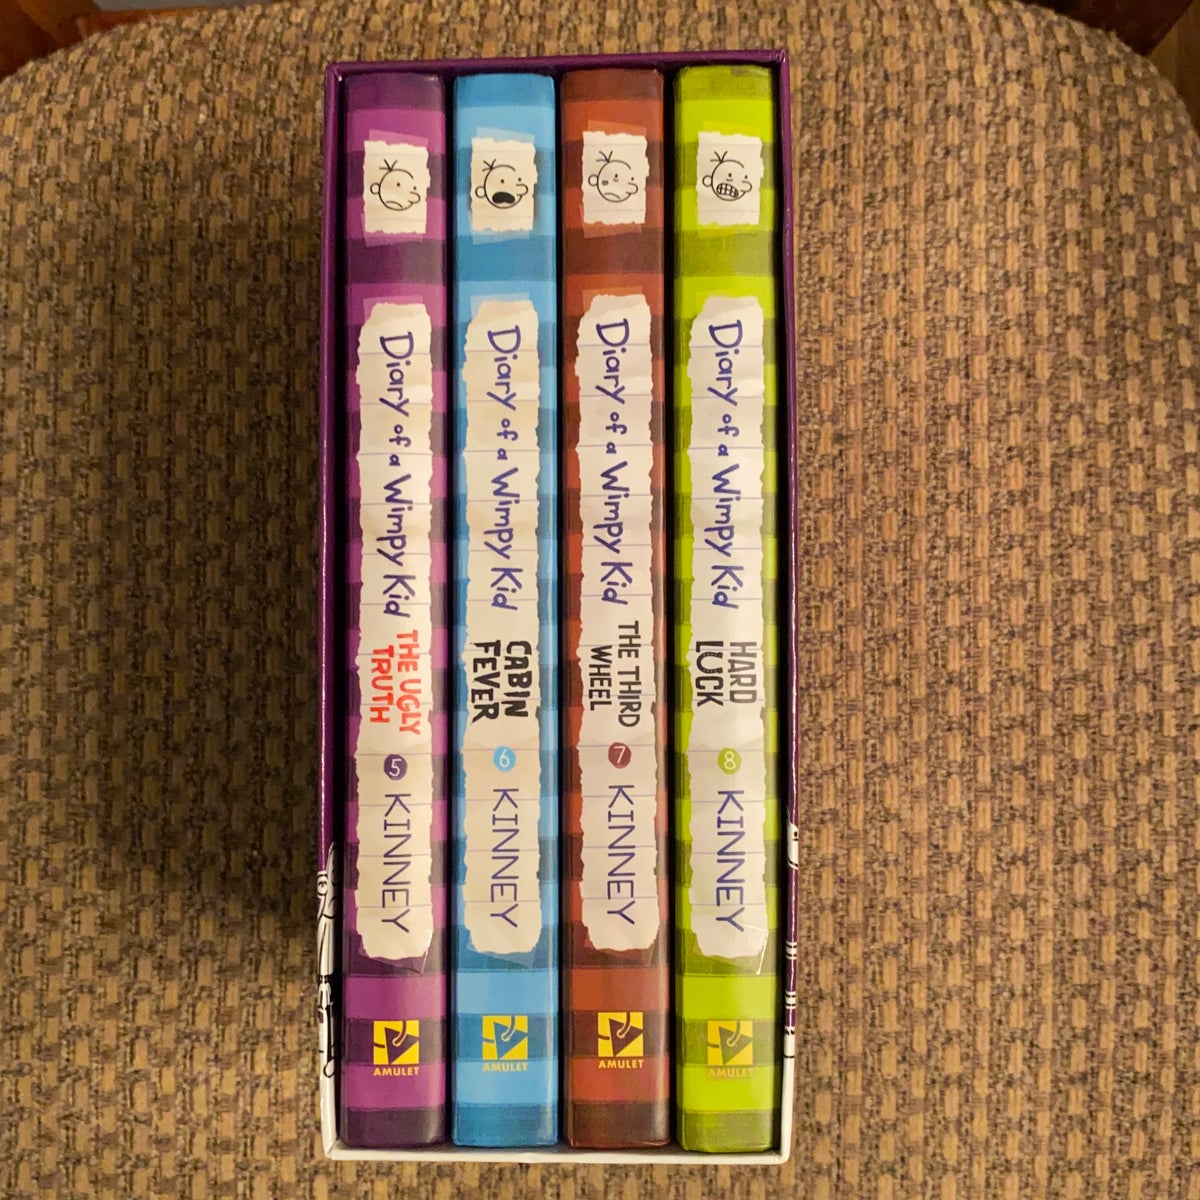 Diary of a Wimpy Kid Box of books by Jeff Kinney, Hardcover